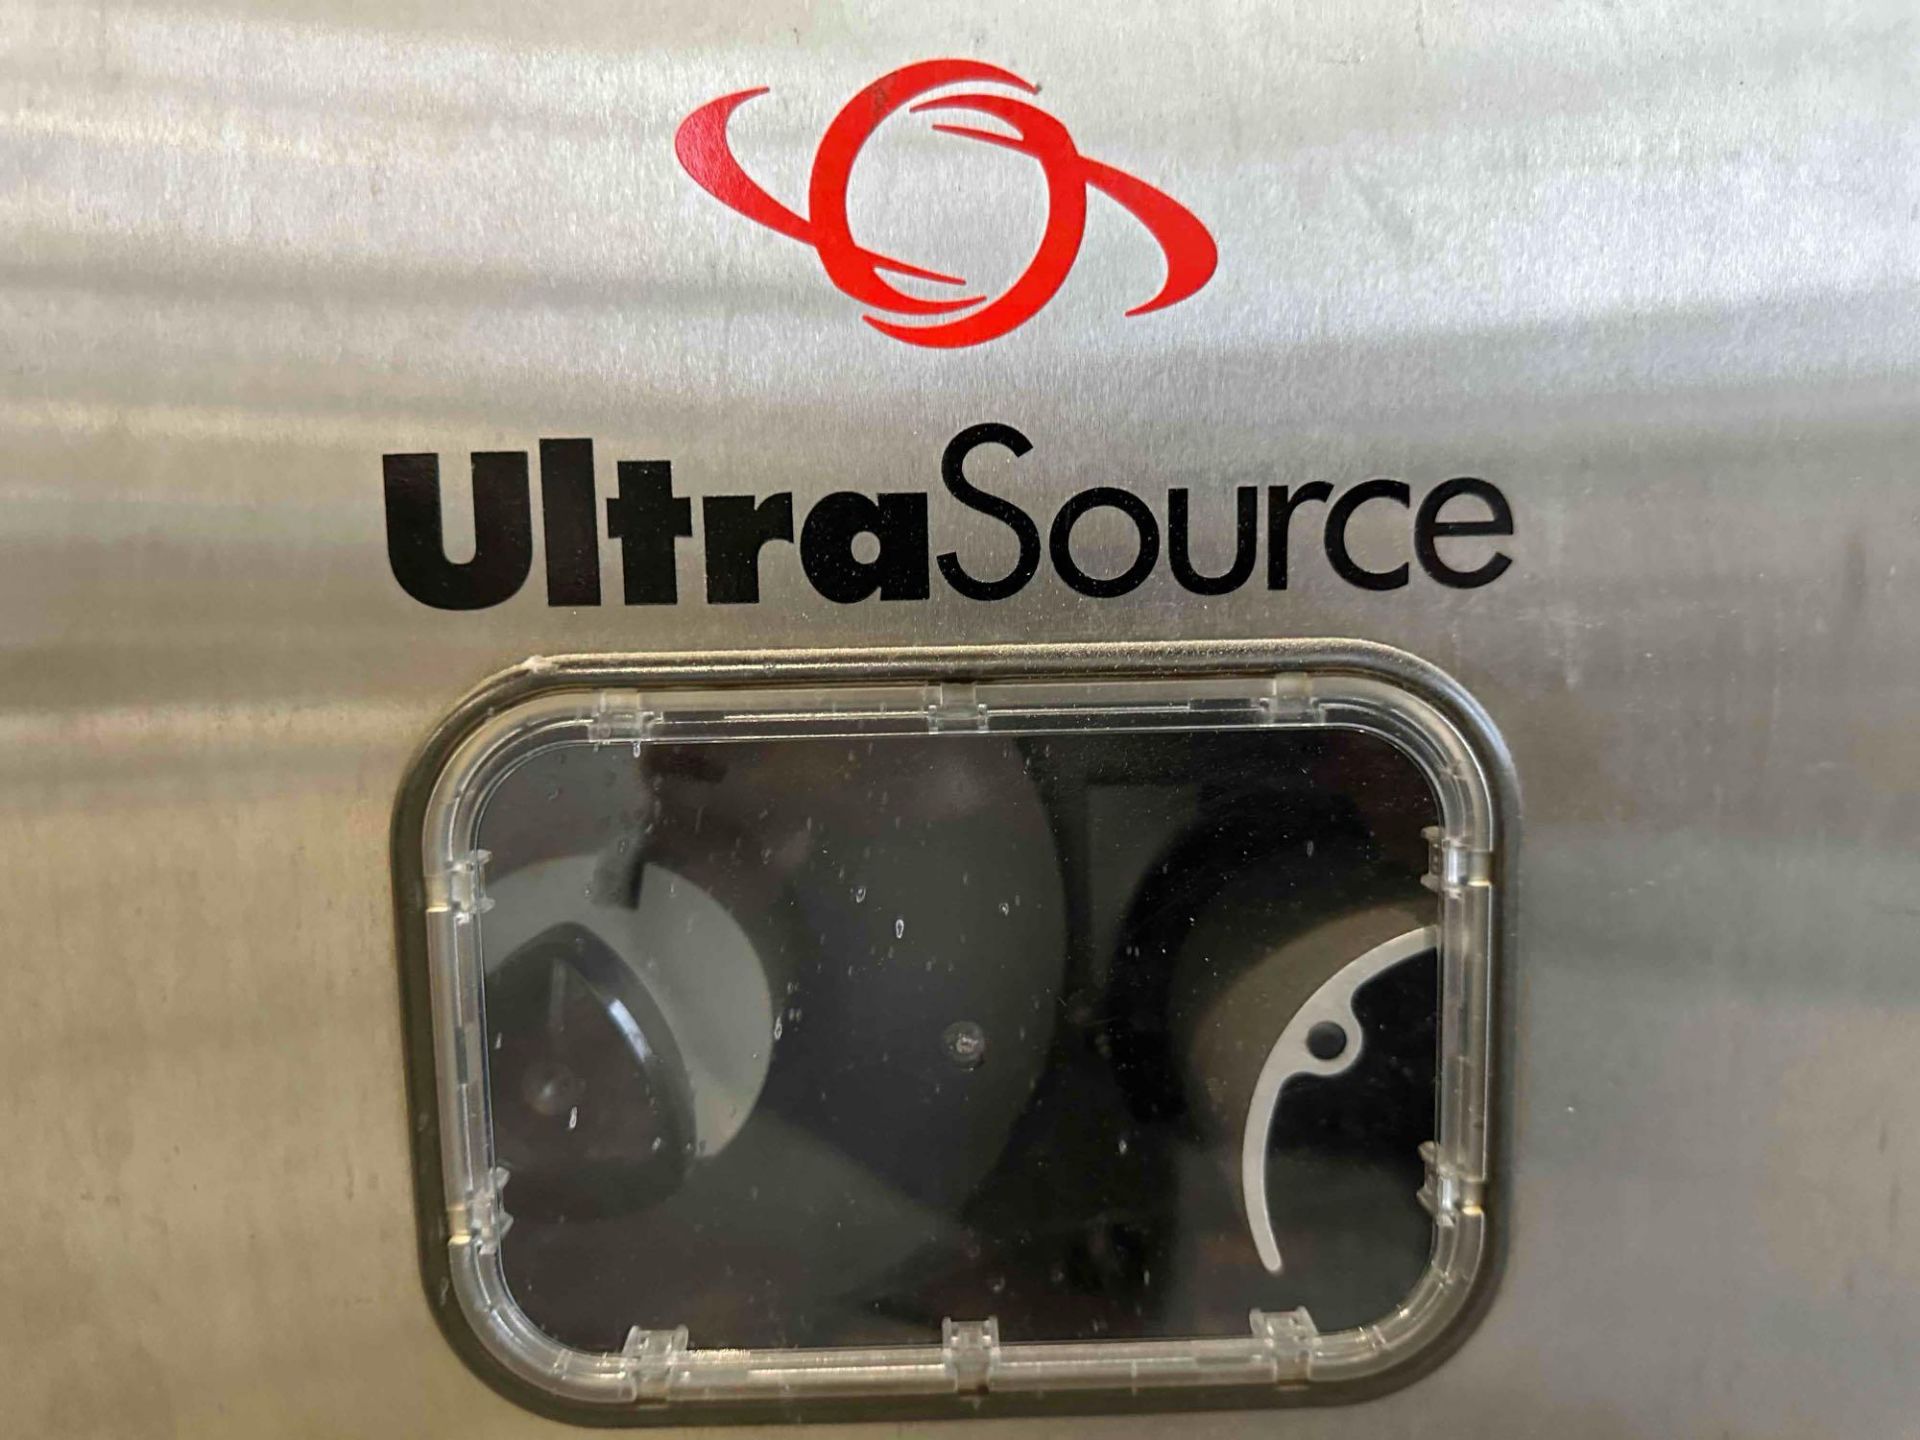 UltraSource ES 5900 Semi Automatic Weigh Price Top and Bottom Pressure SensitiveLabeler - Image 7 of 9